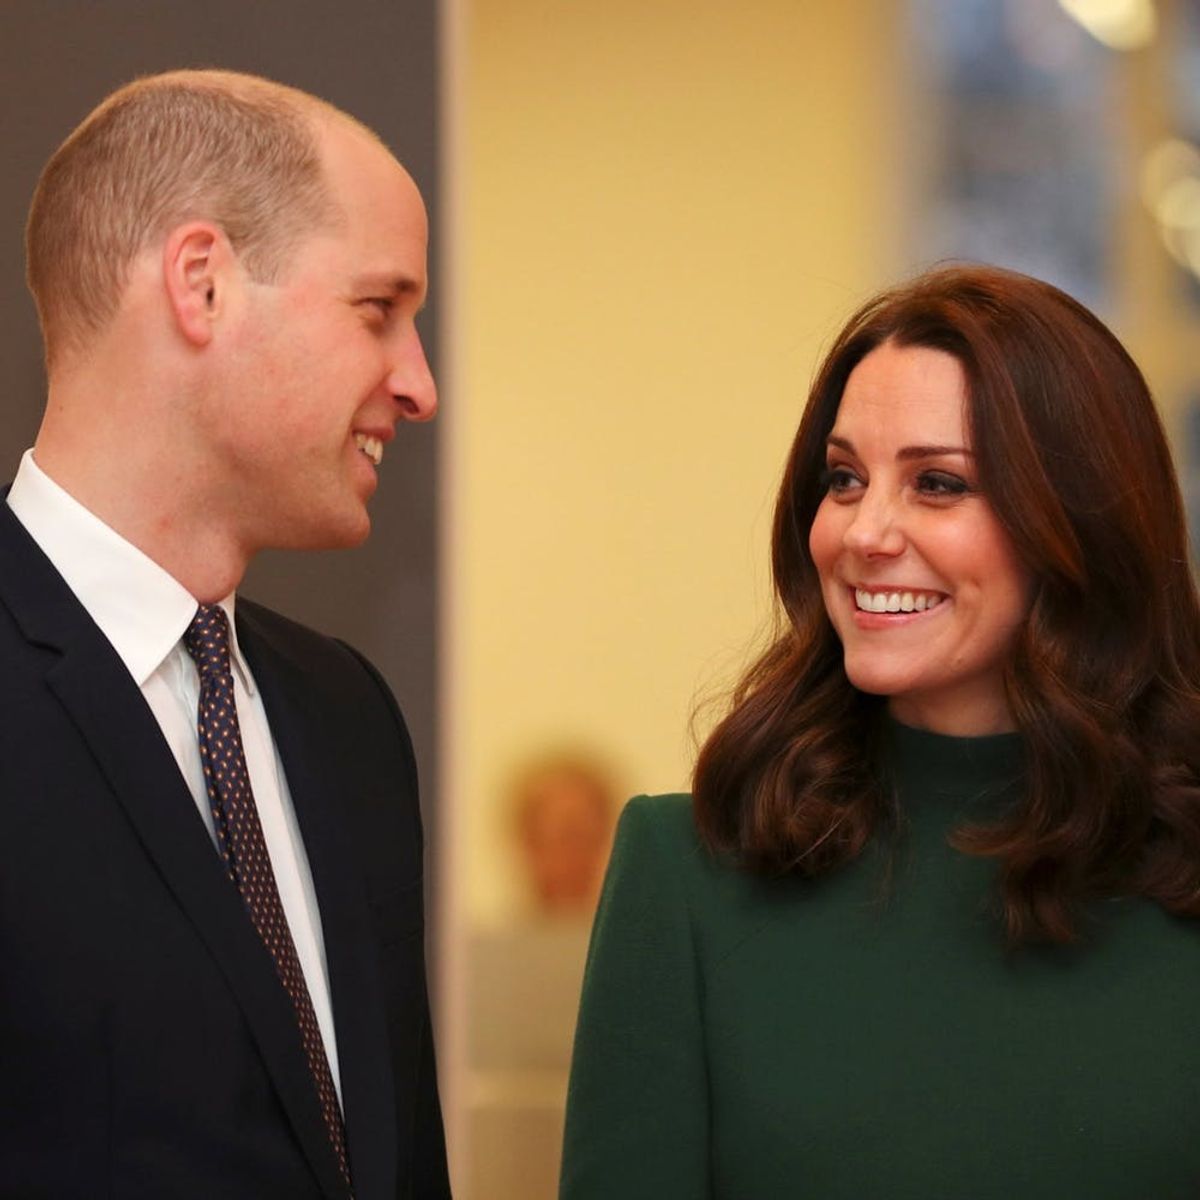 What Will Prince William and Duchess Kate Name the New Royal Baby?